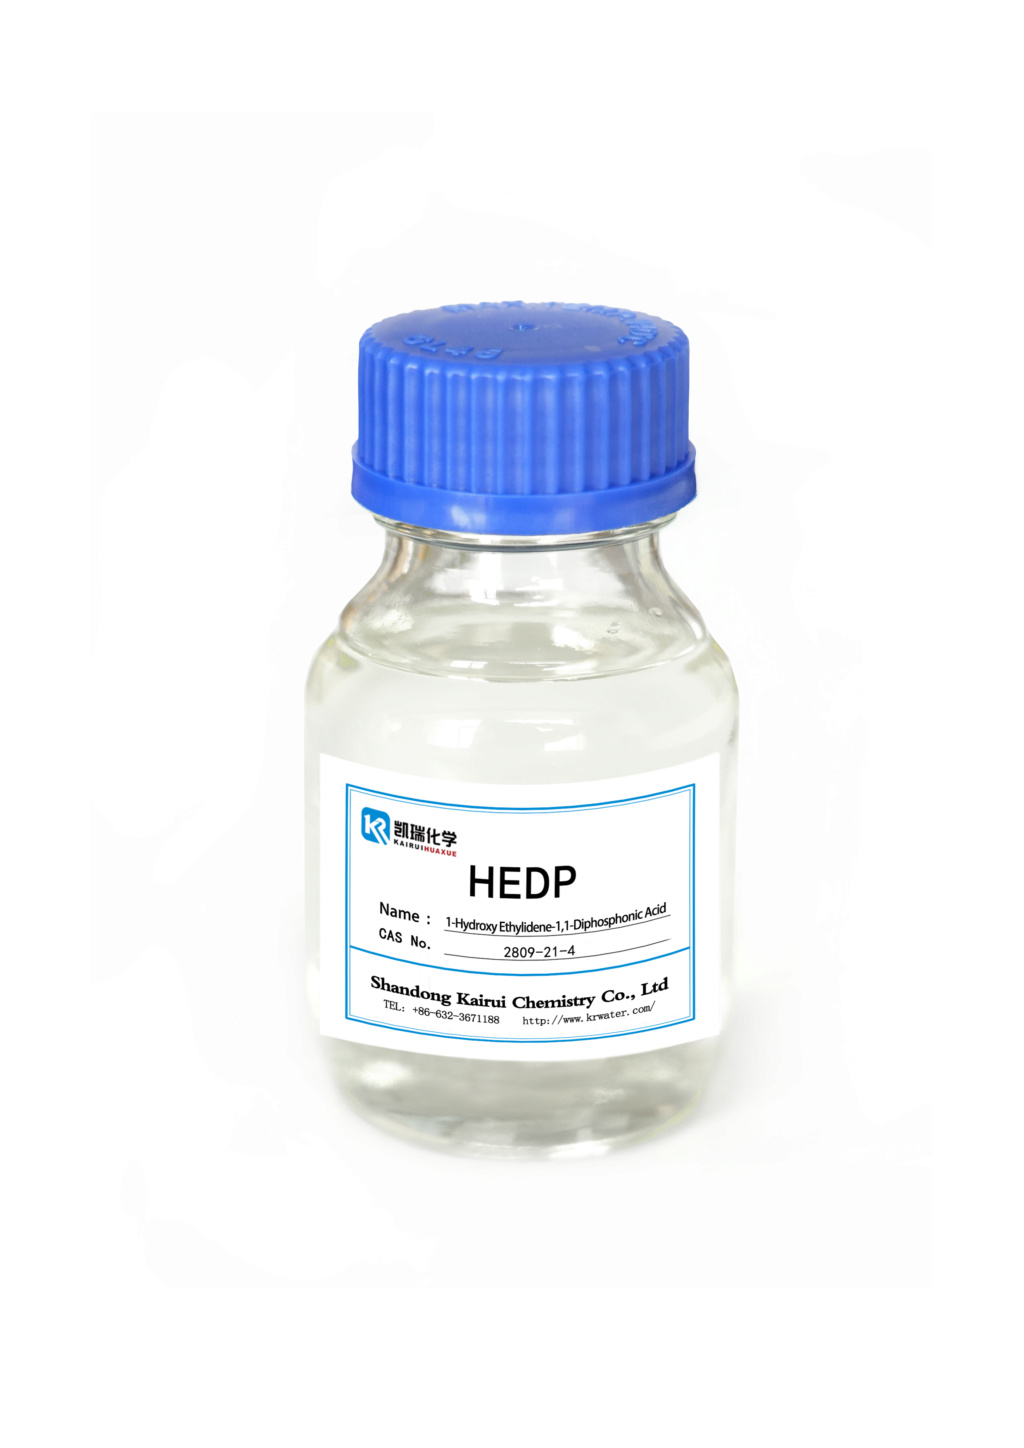 How to use HEDP？ Hedp10